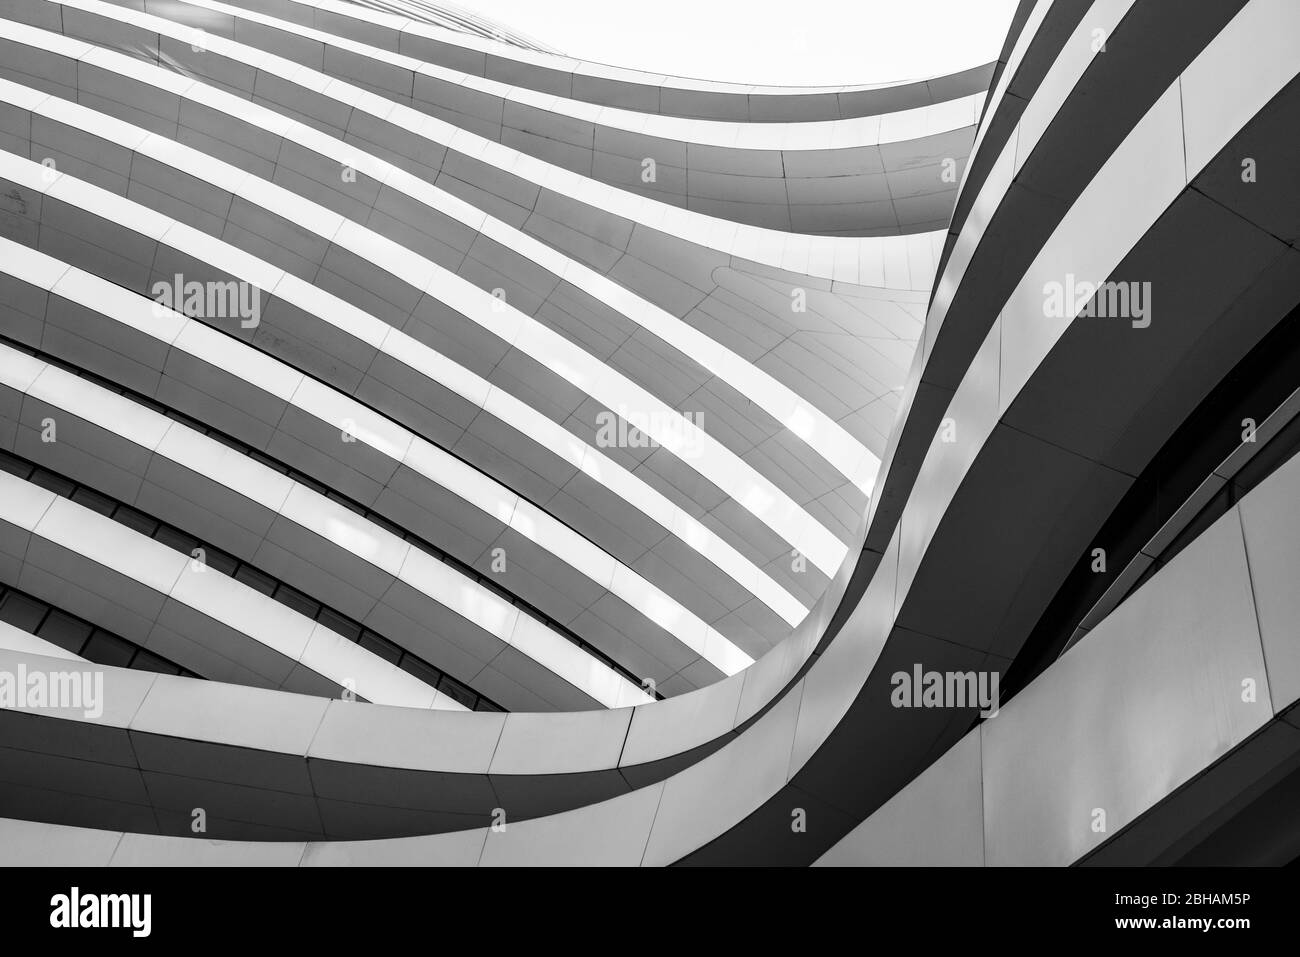 Asia, People's Republic of China, North China, Beijing, northern capital, Modern architecture in Wang Jing Stock Photo